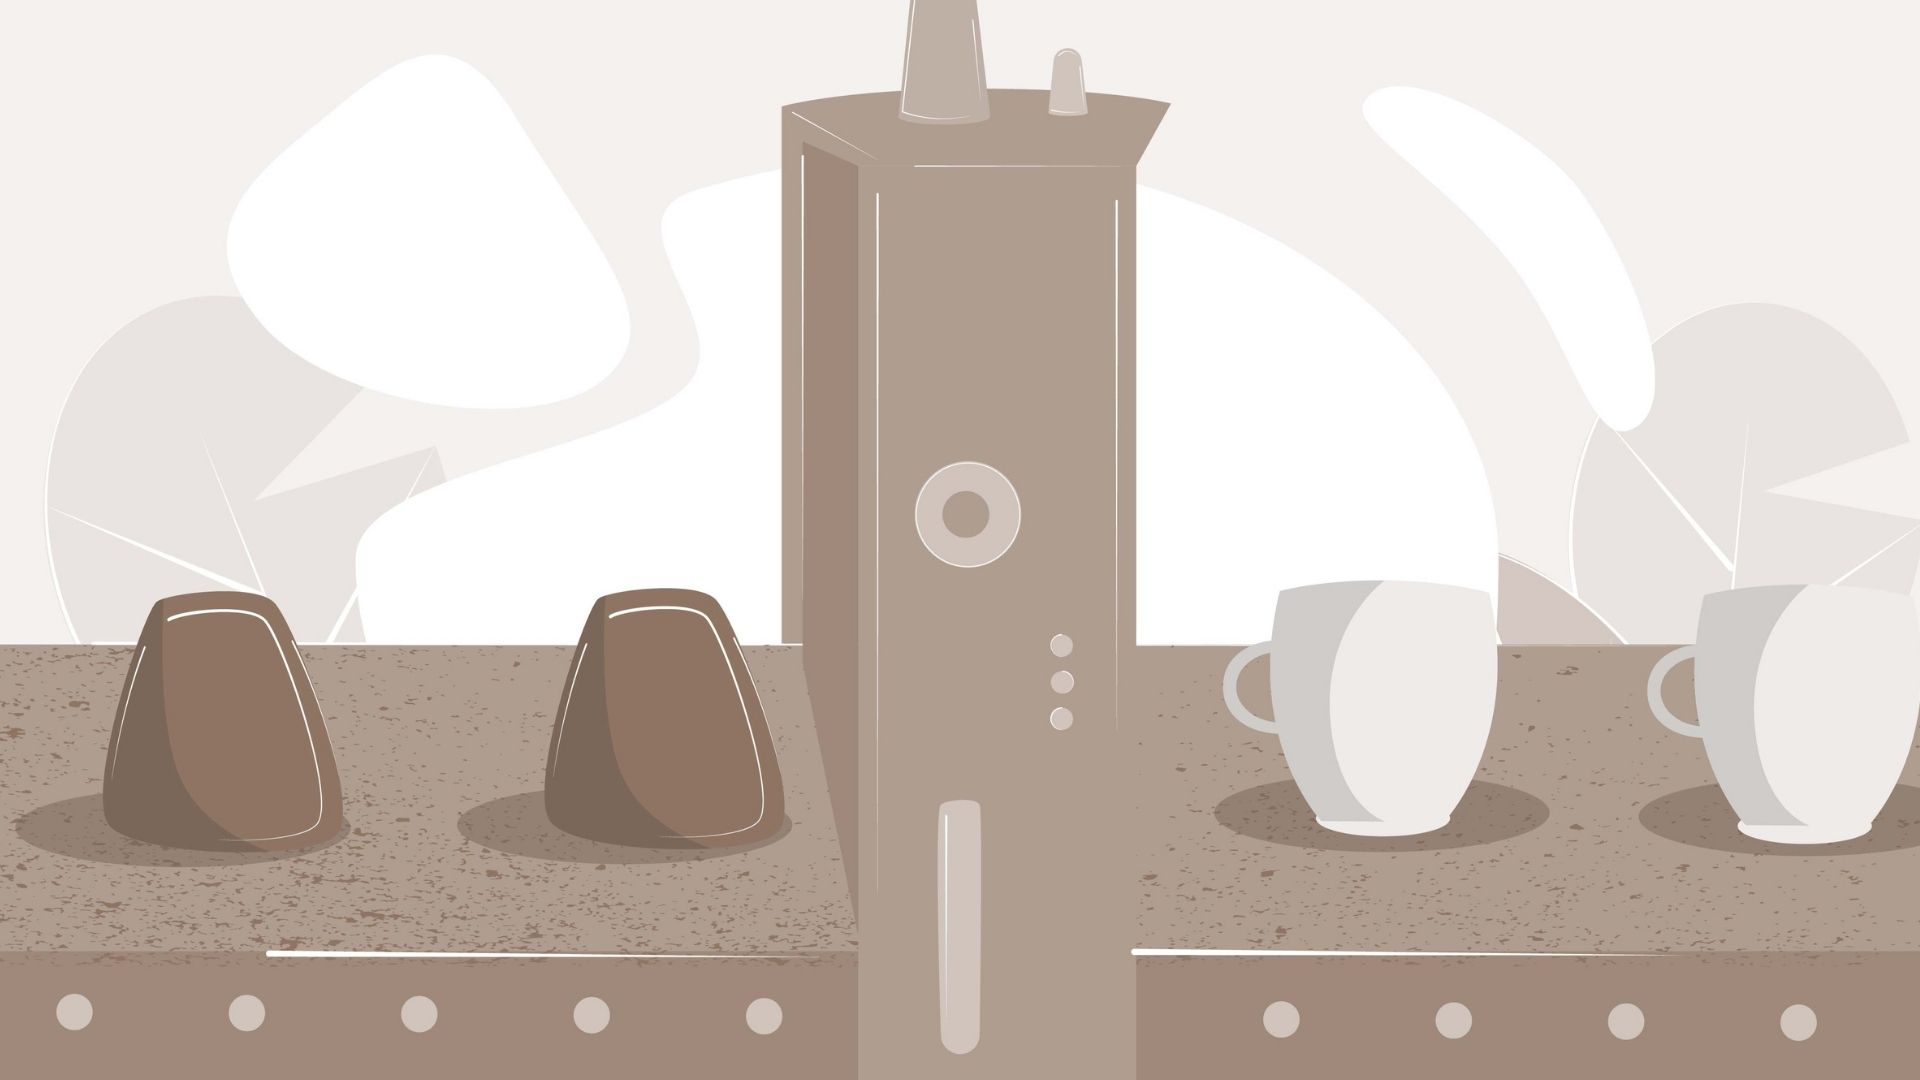  The use of coffee grounds | Explainer video by Darvideo studio